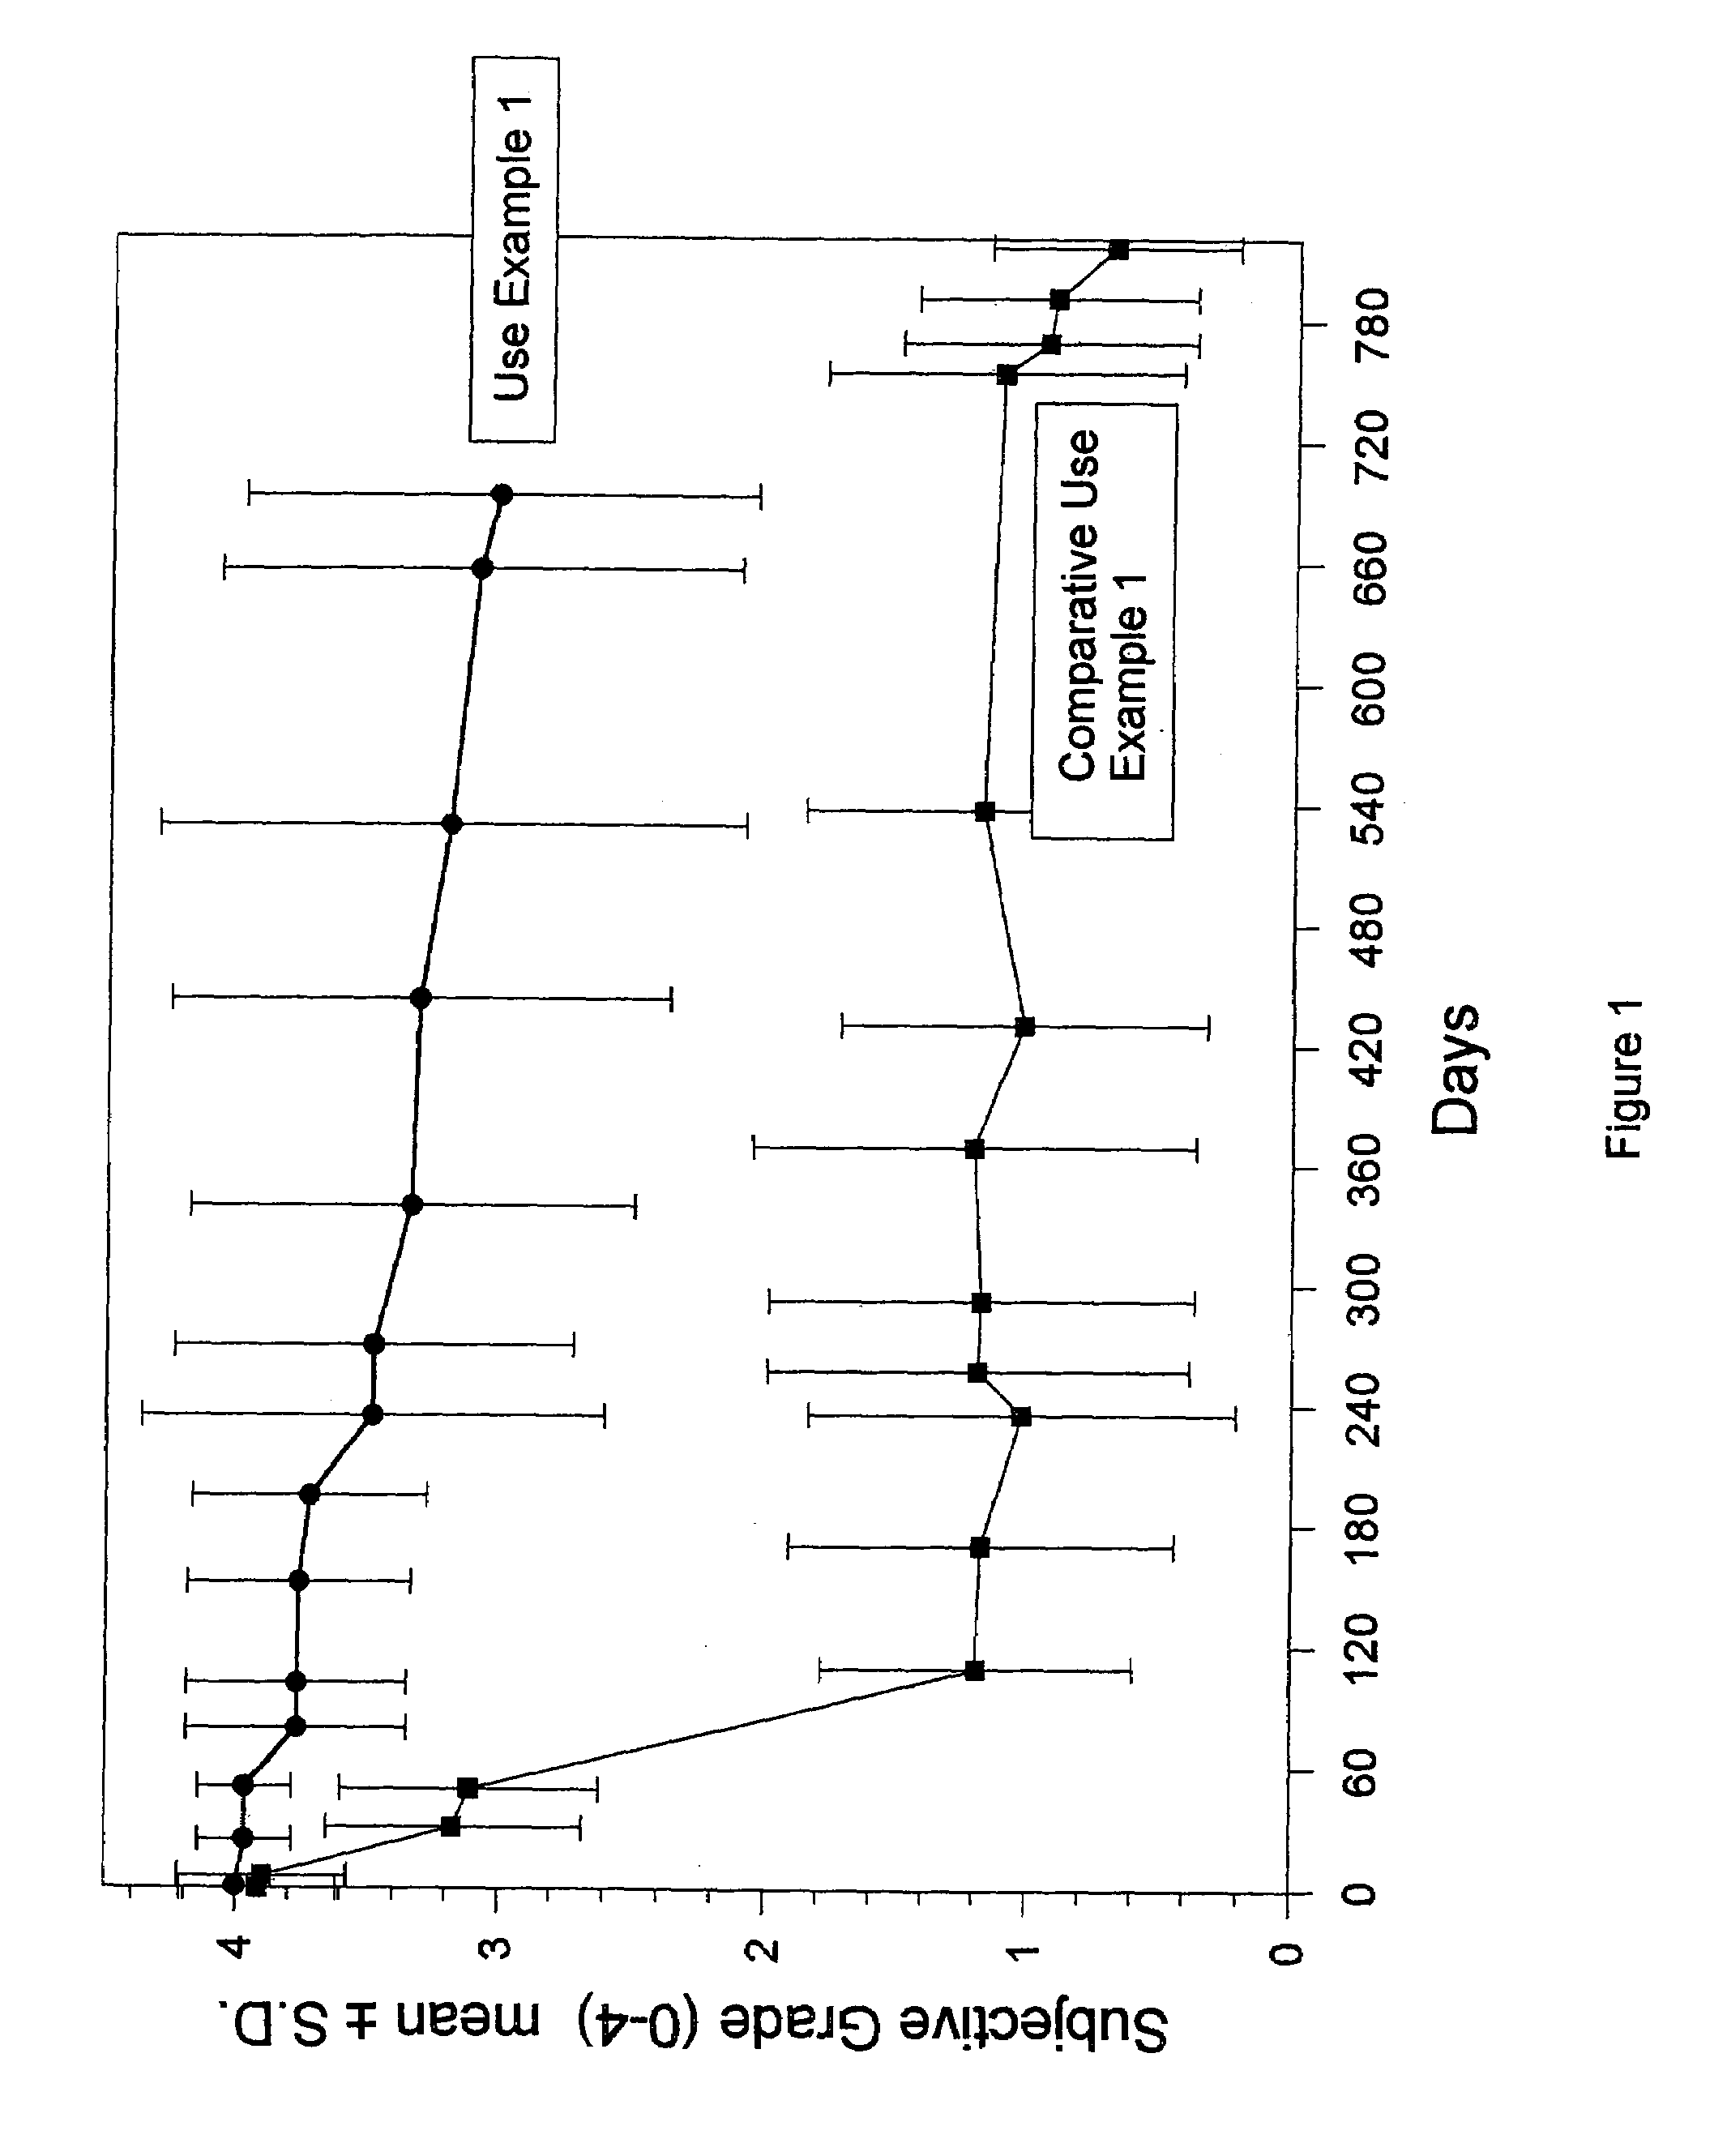 Materials for soft tissue augmentation and methods of making and using same